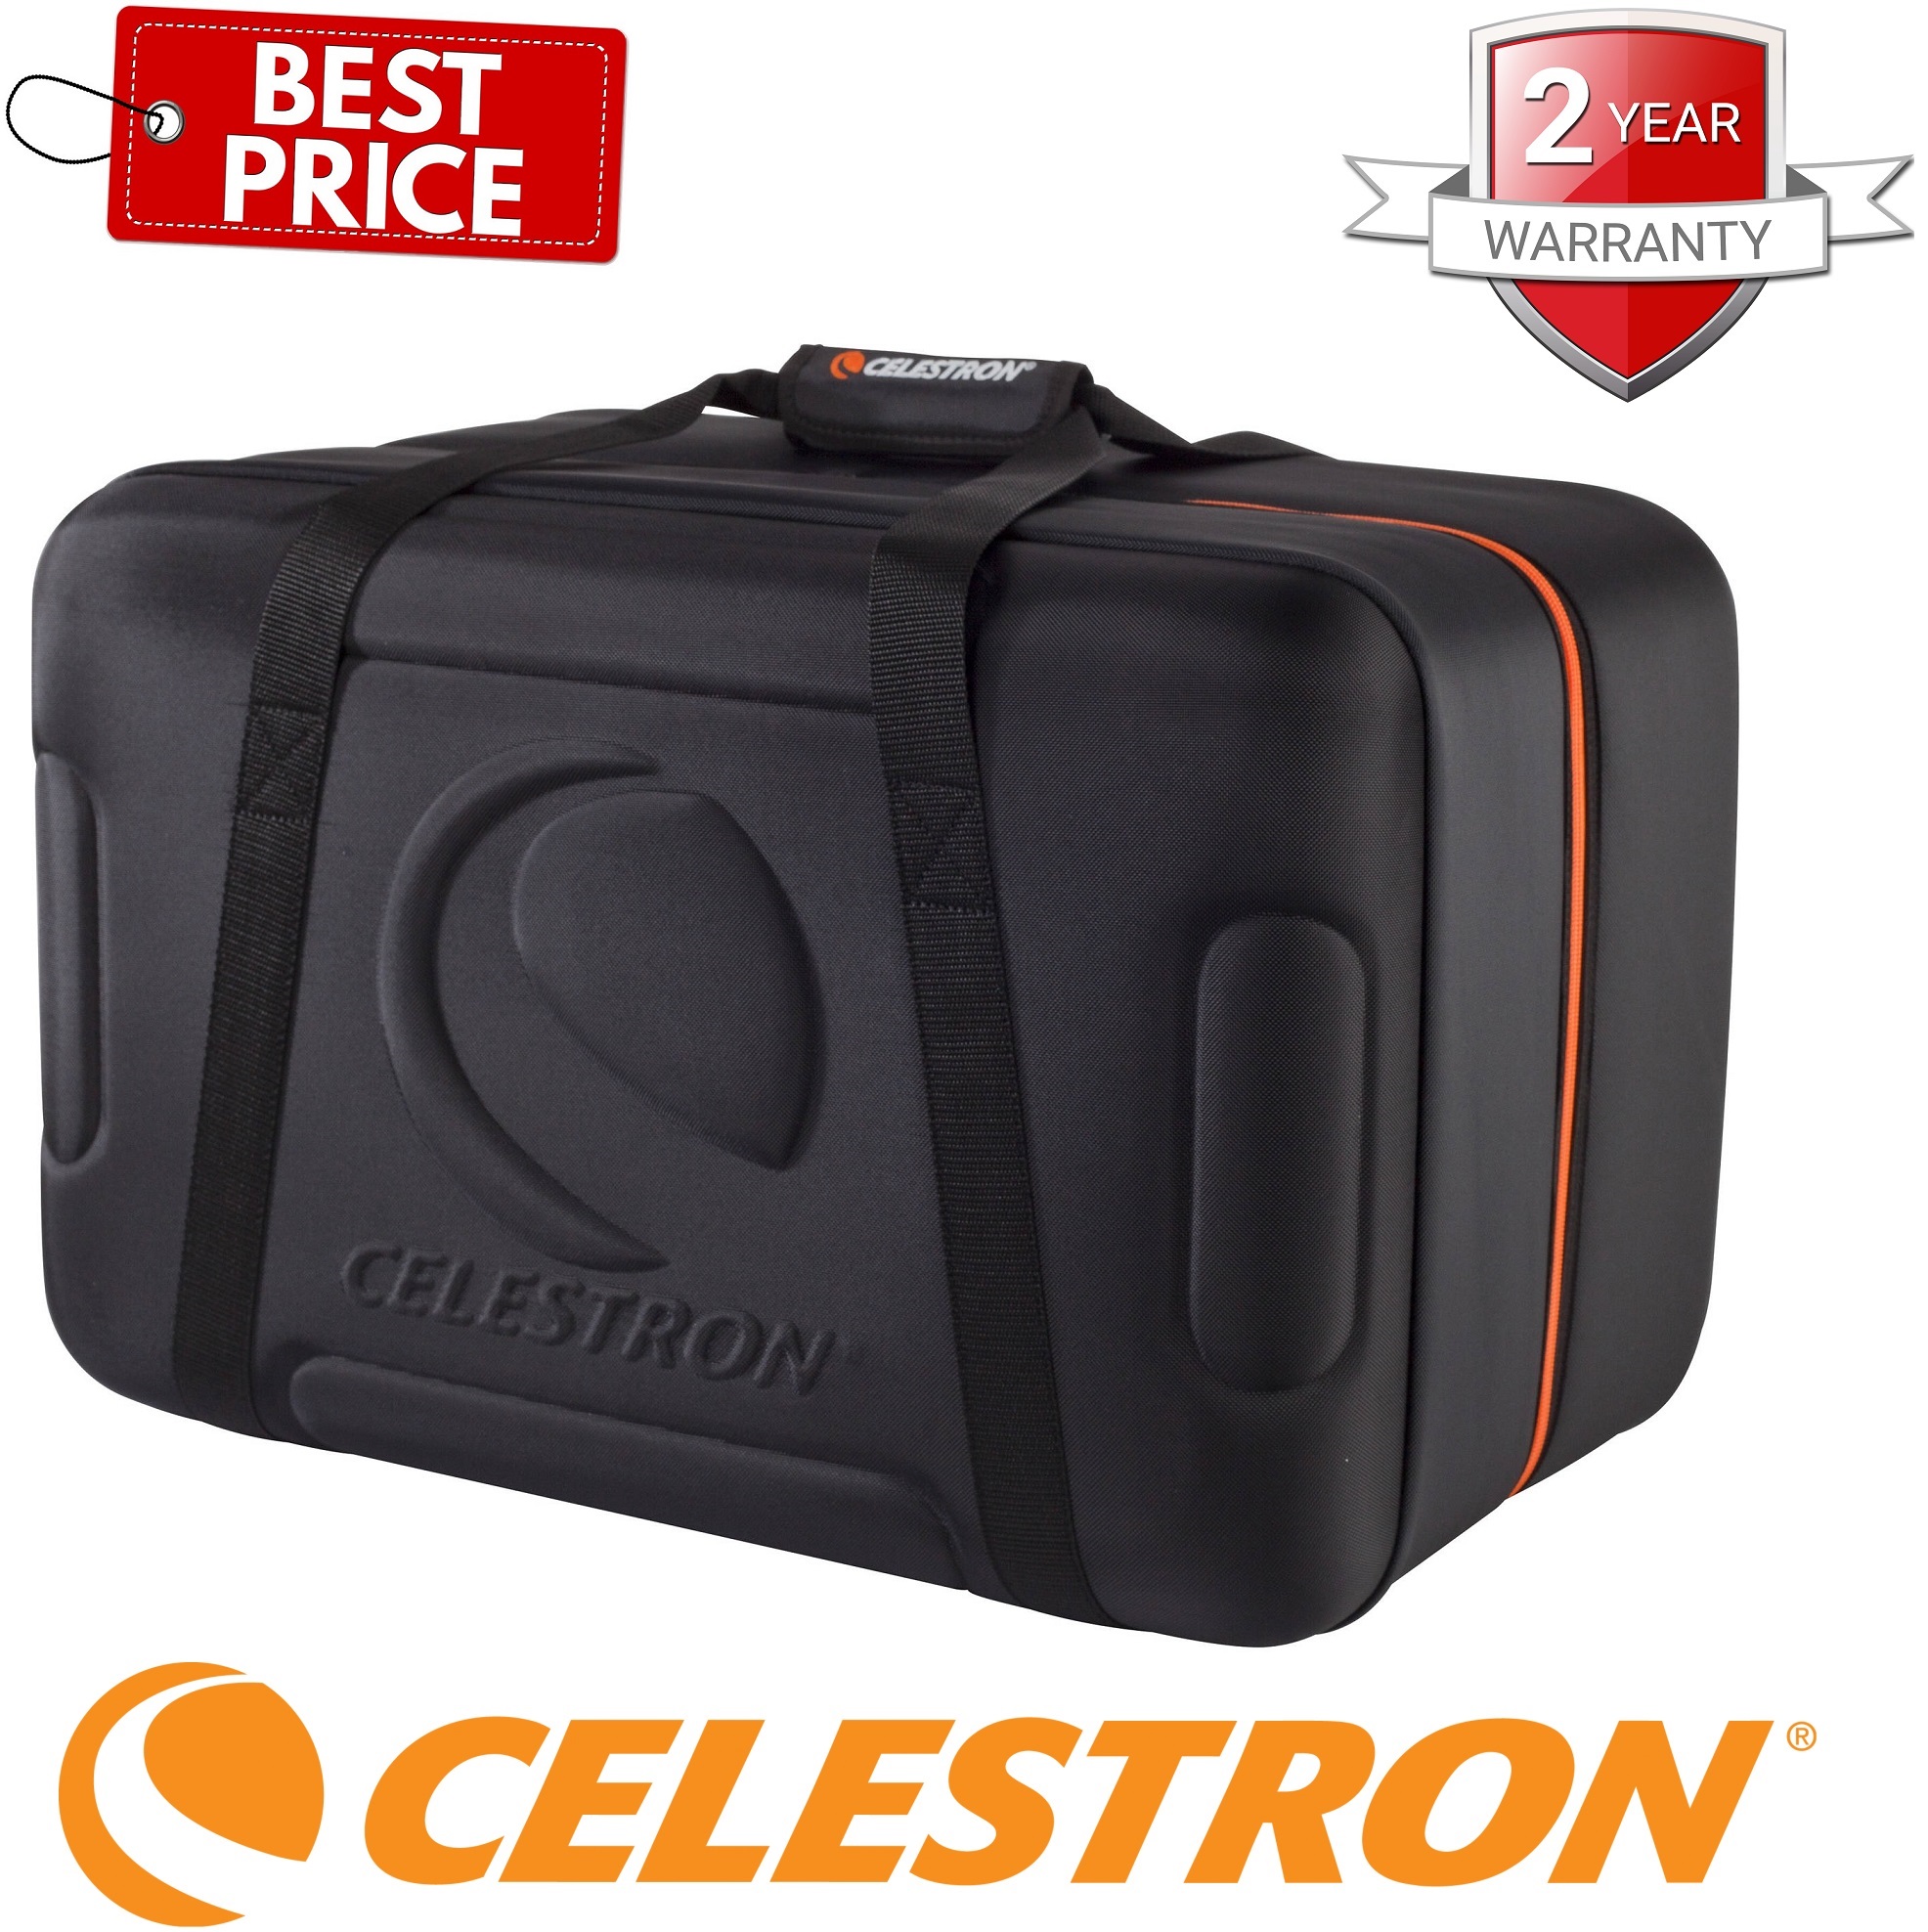 Celestron Carrying Case for 4/5/6/